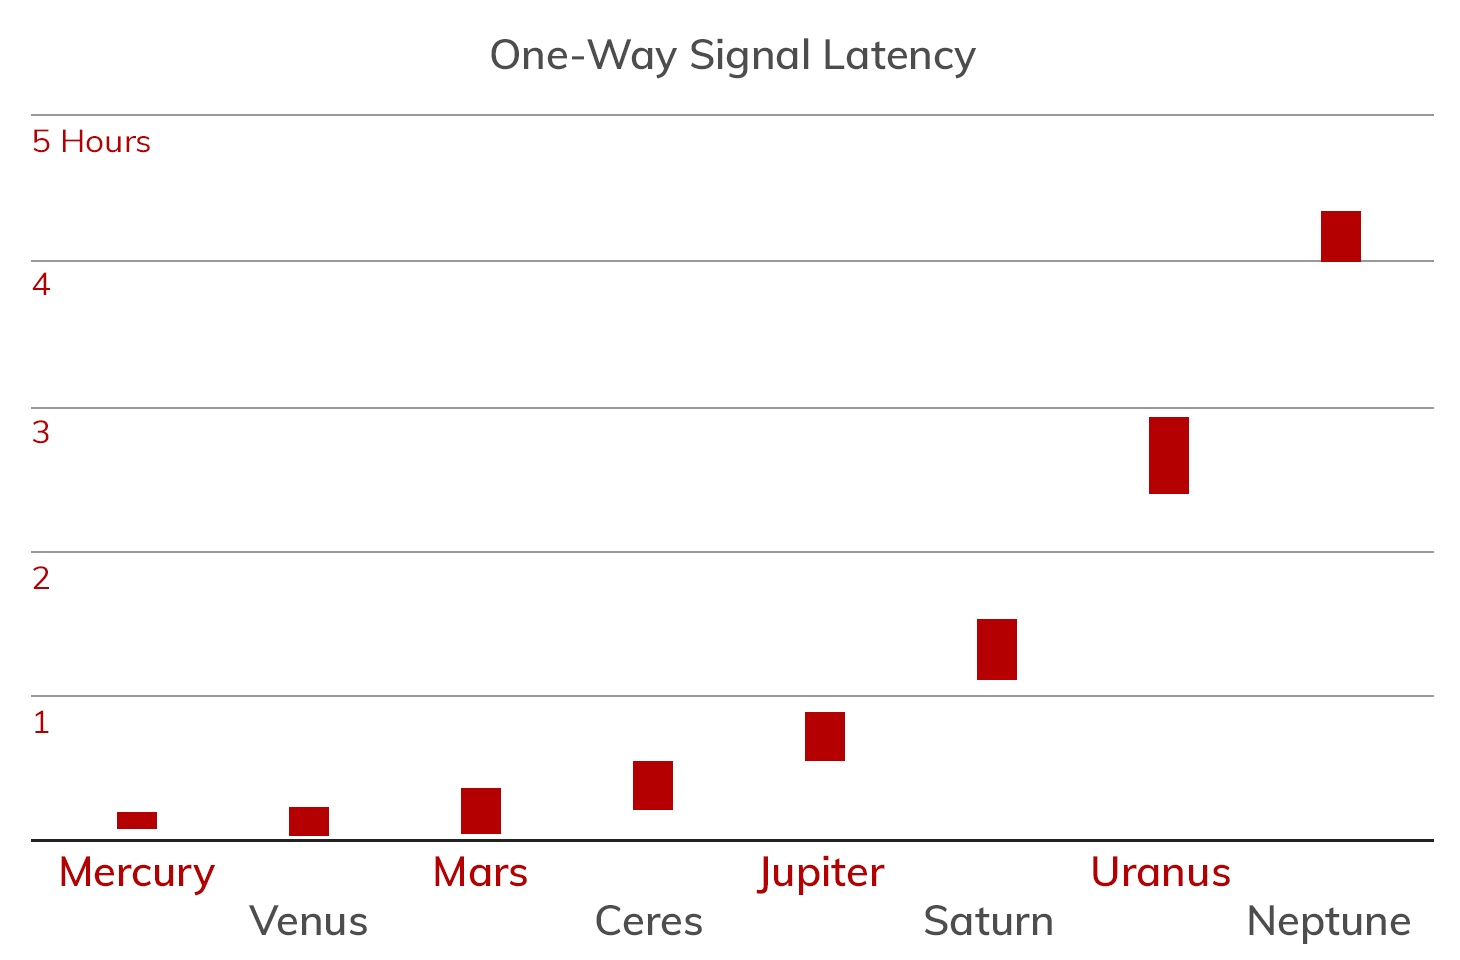 Radio signal time lag for various planets